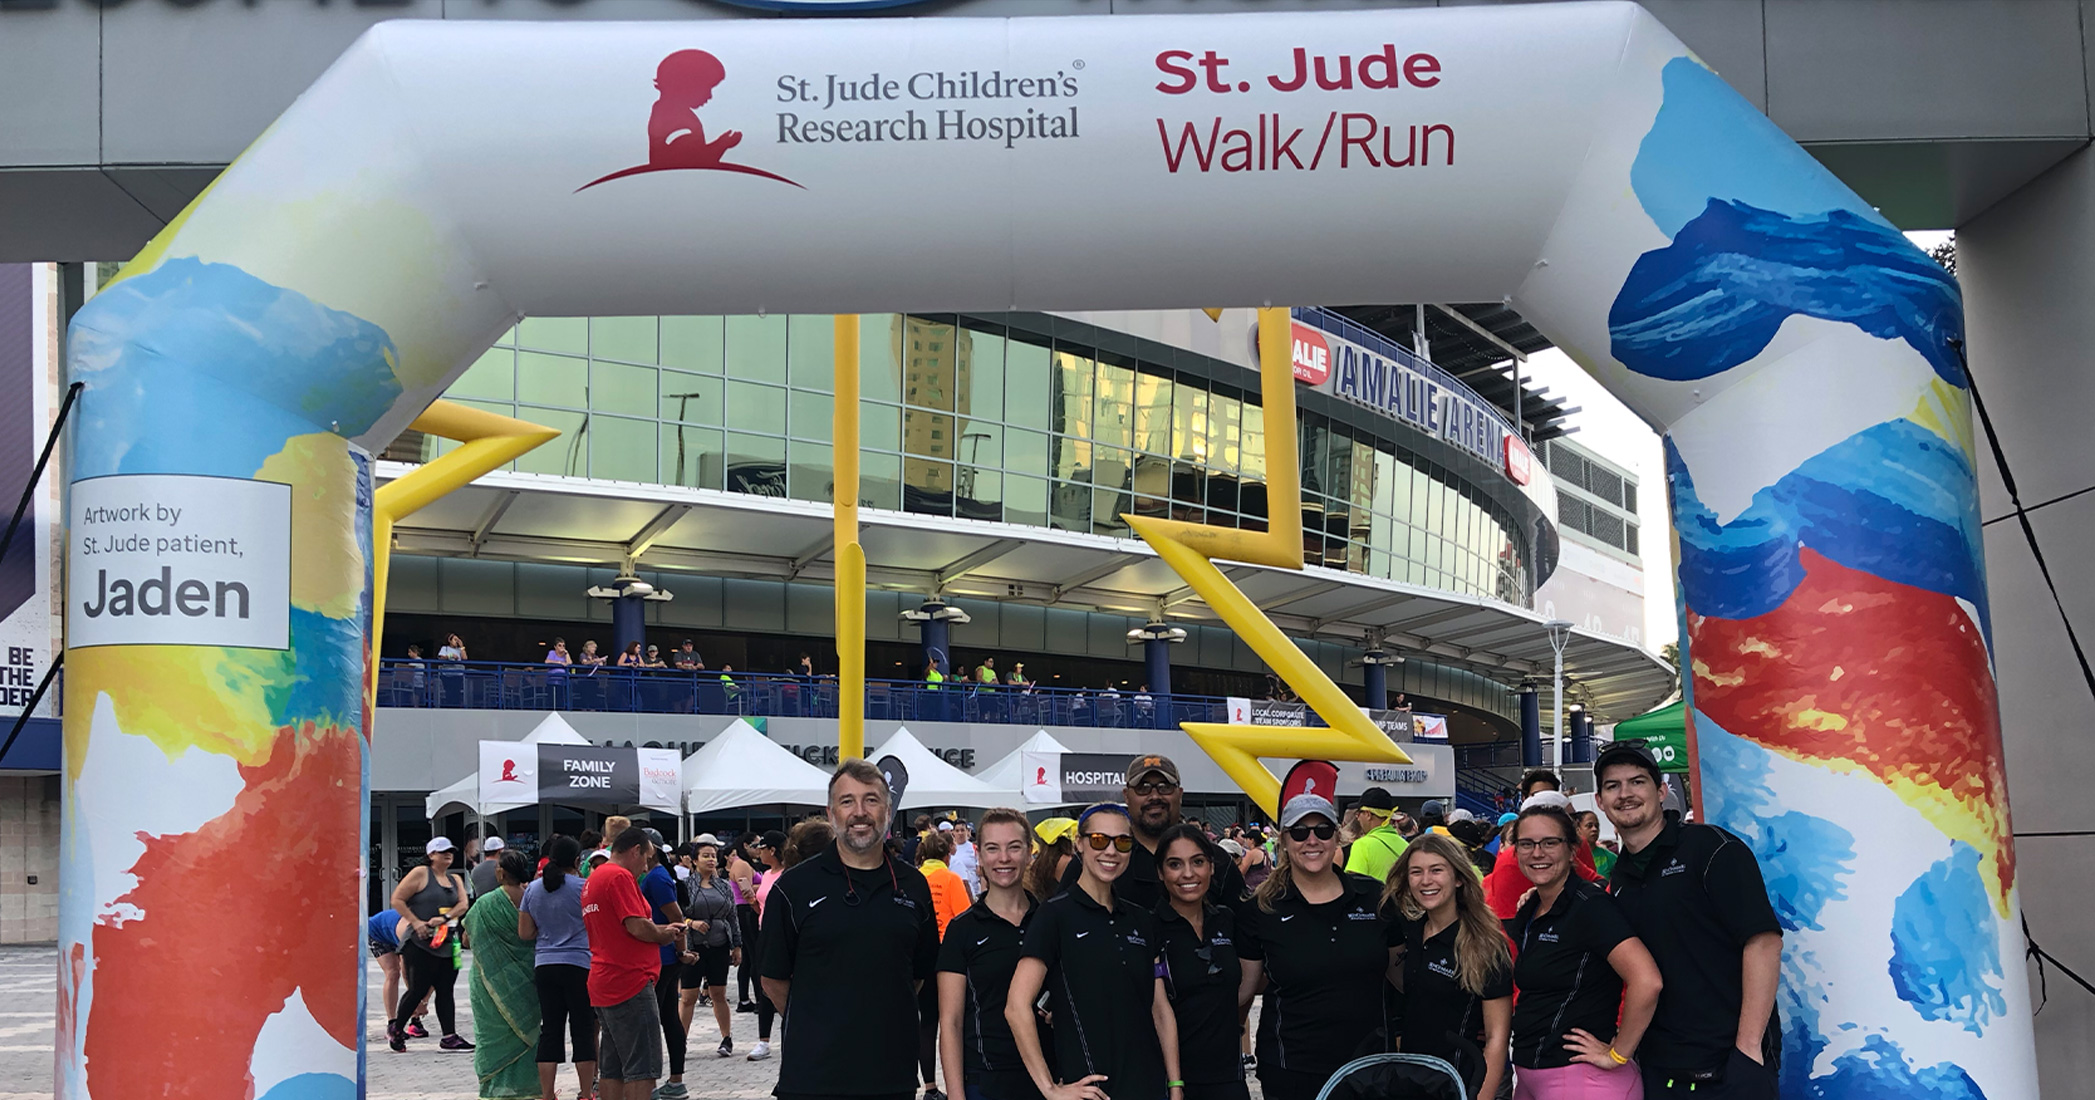 Benchmark International Completed St. Jude 5k Walk/Run for Charity